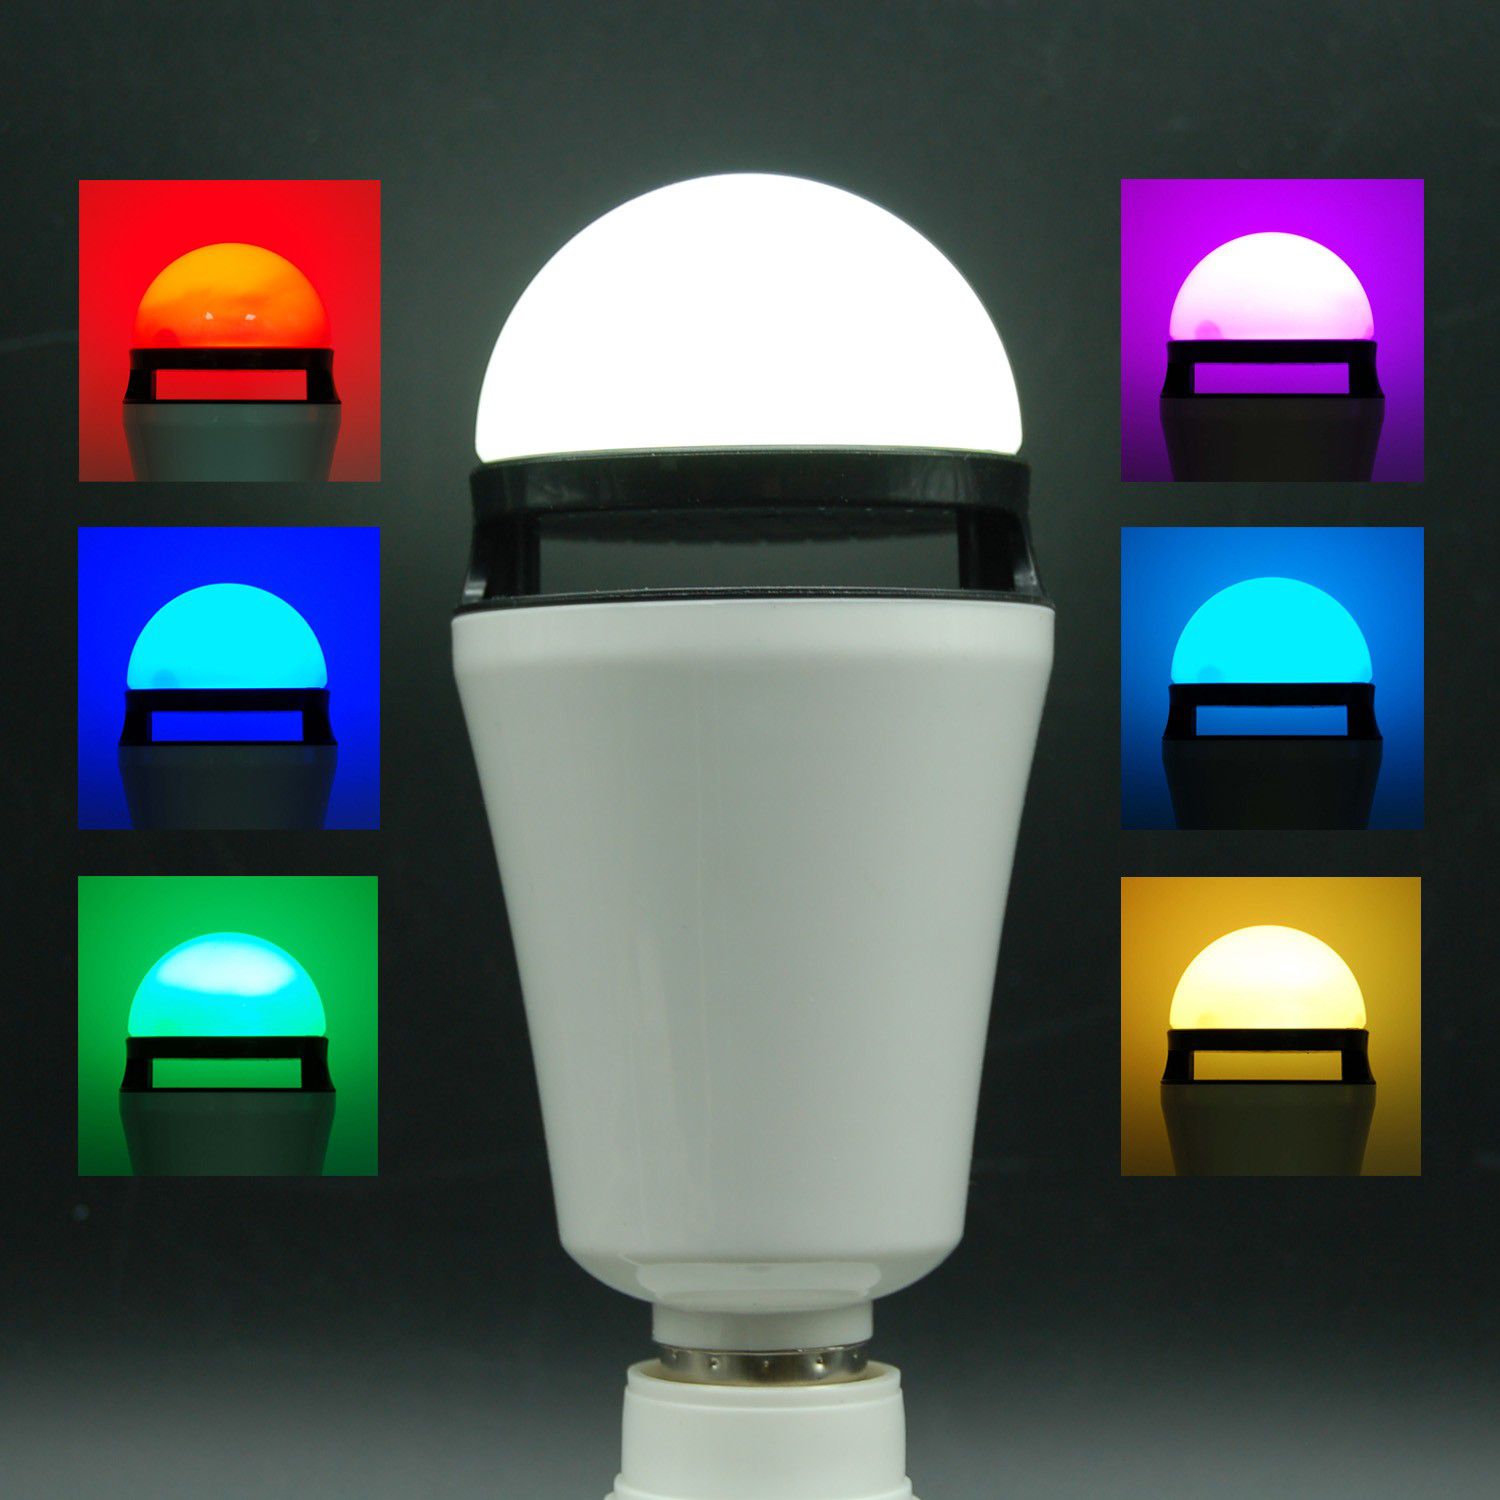 New Bluetooth LED SPEAKER LIGHT BULB WITH A REMOTE CONTROL